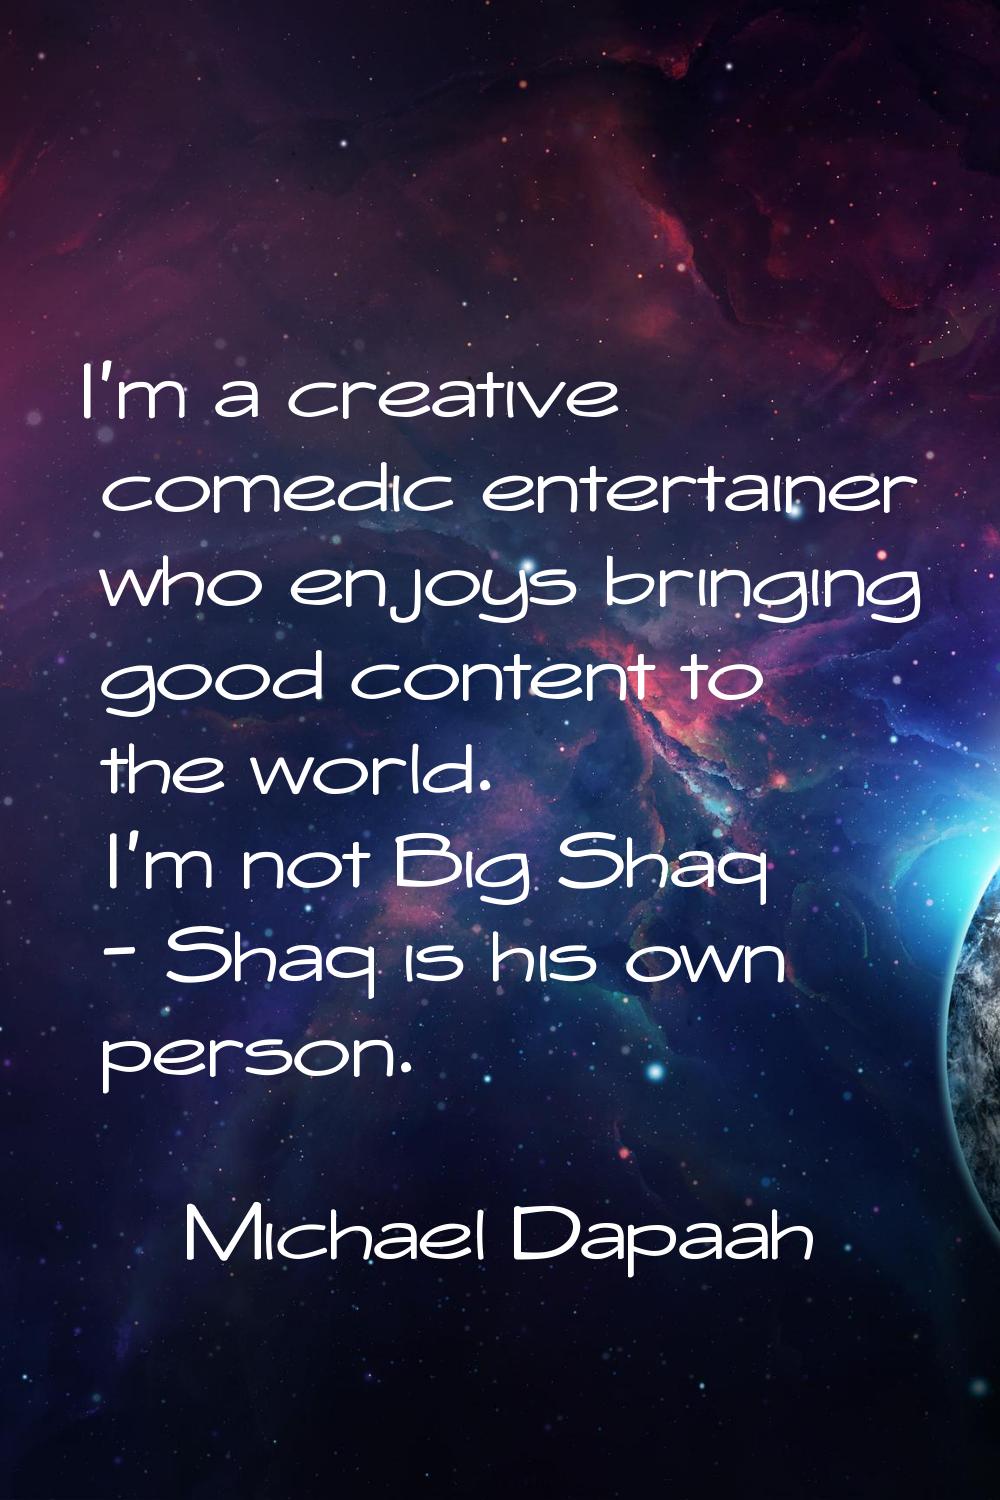 I'm a creative comedic entertainer who enjoys bringing good content to the world. I'm not Big Shaq 